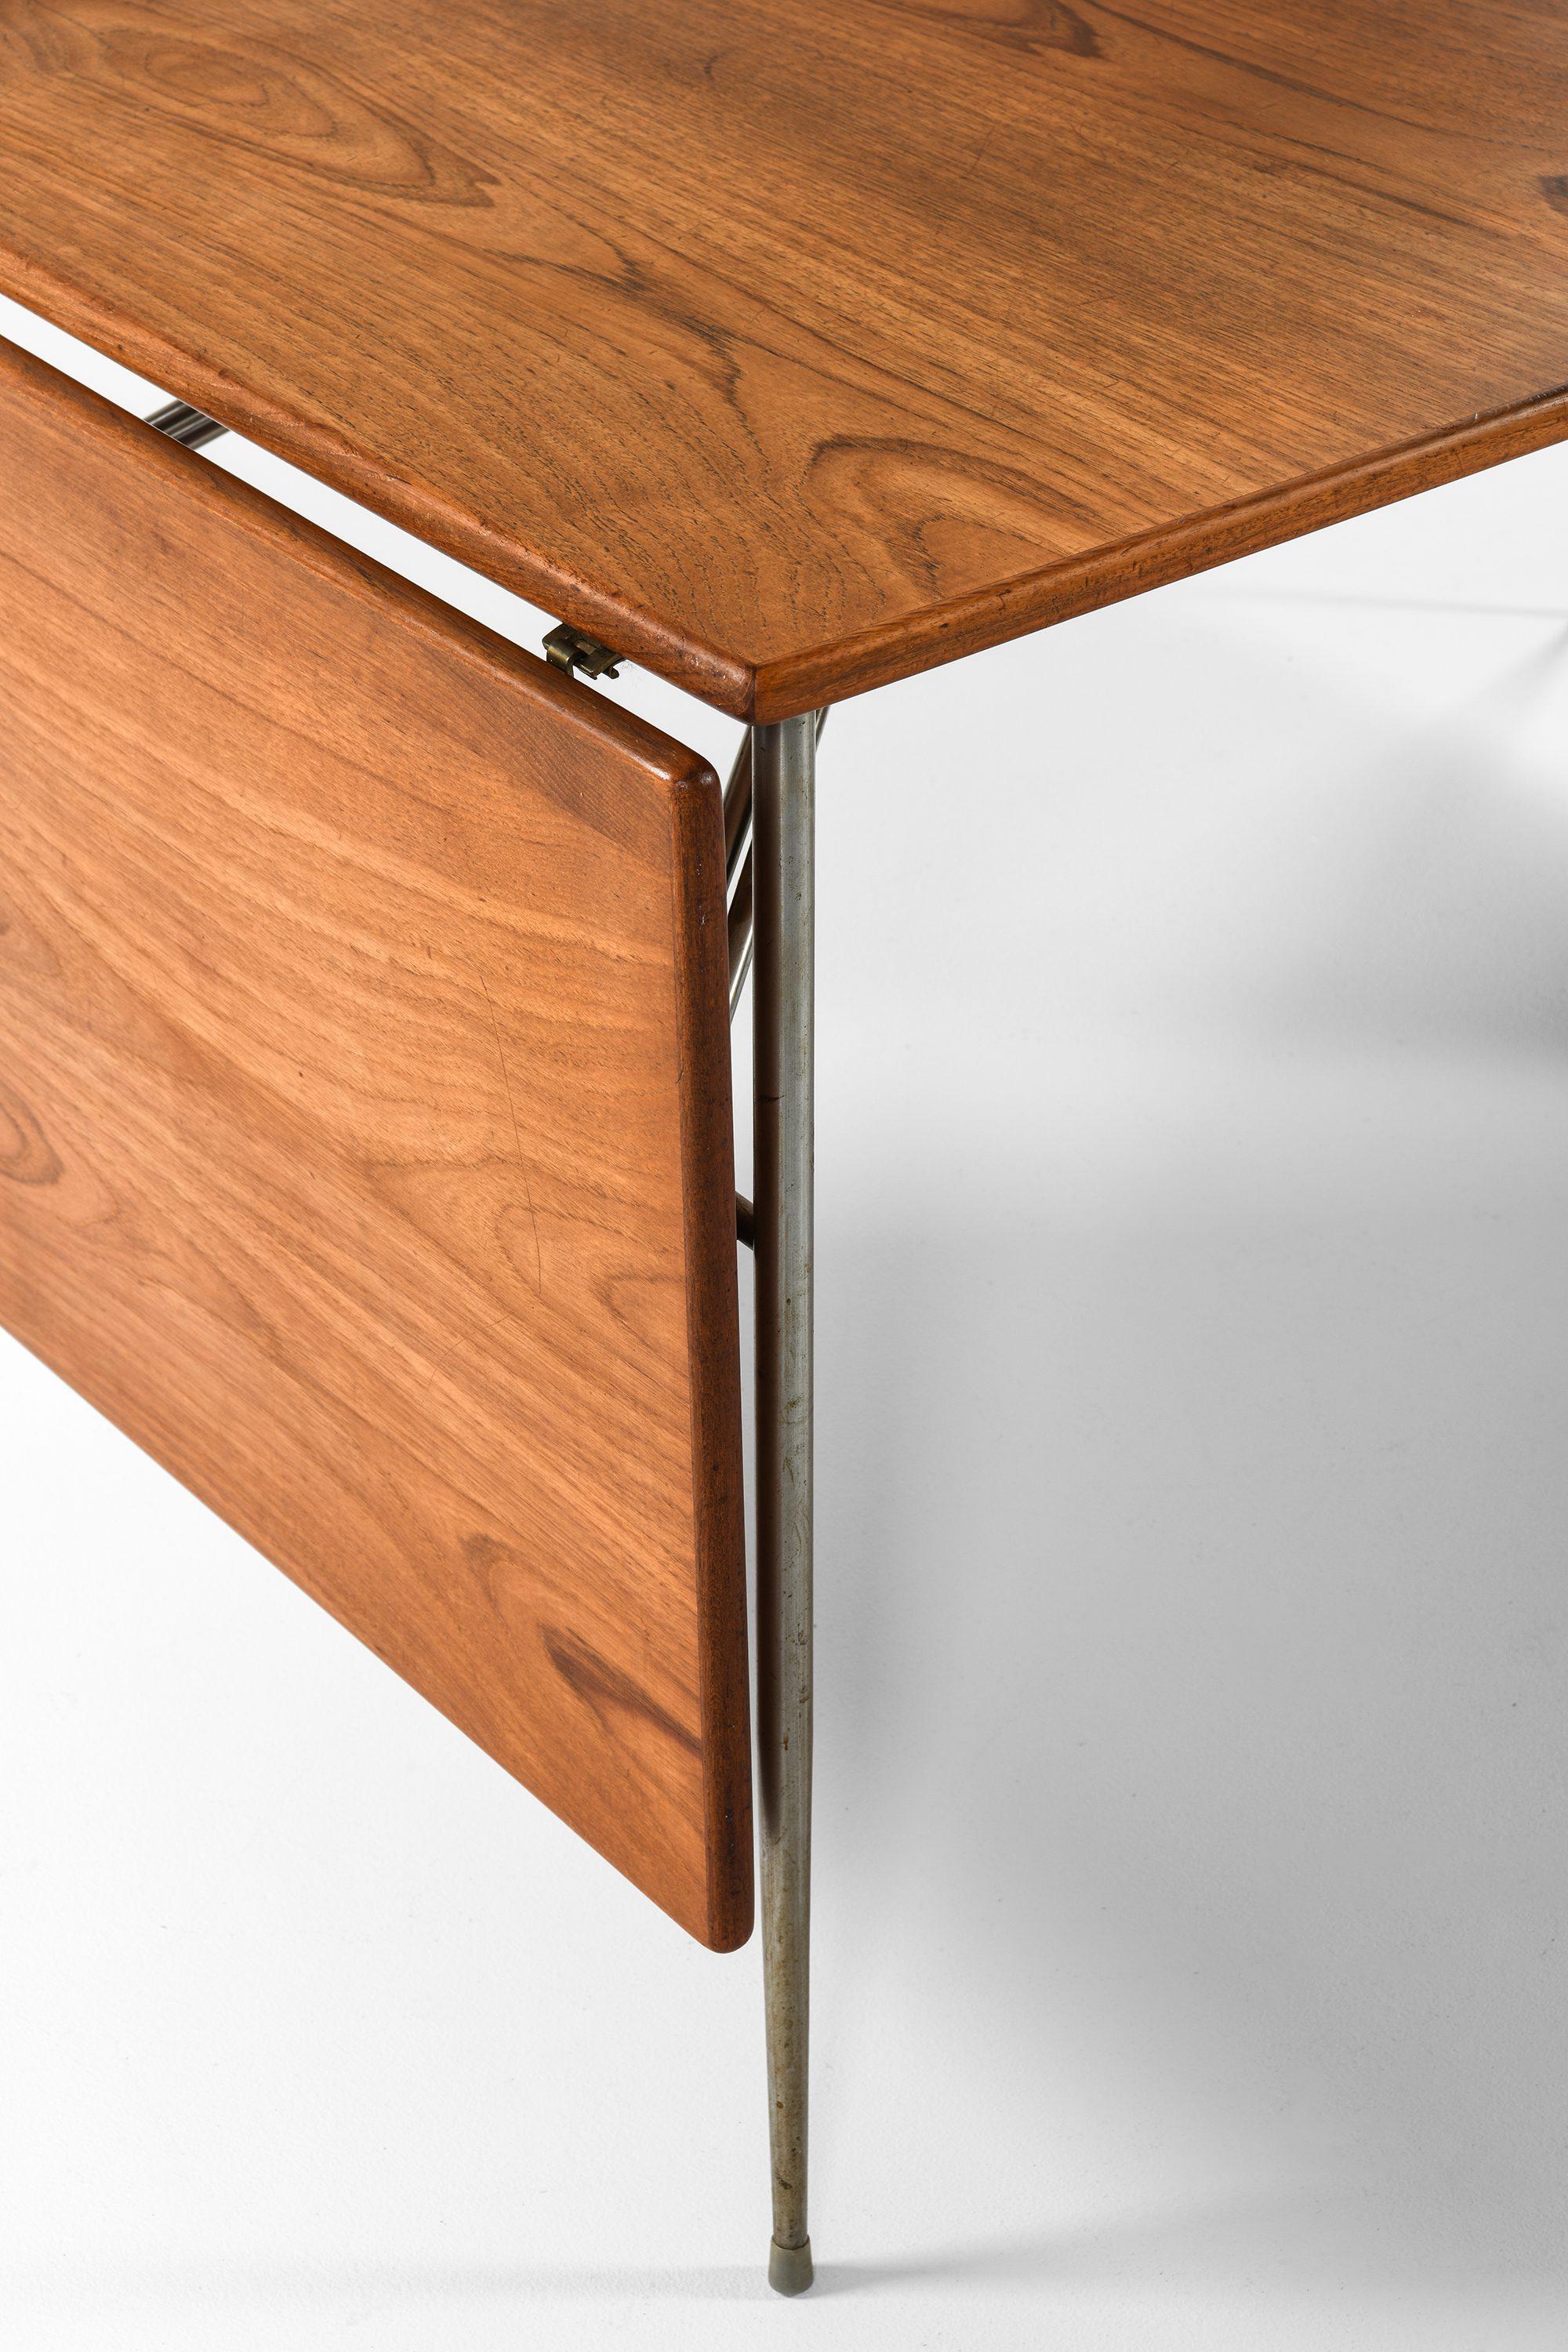 20th Century Dining Table / Desk in Teak and Steel by Børge Mogensen, 1953 For Sale